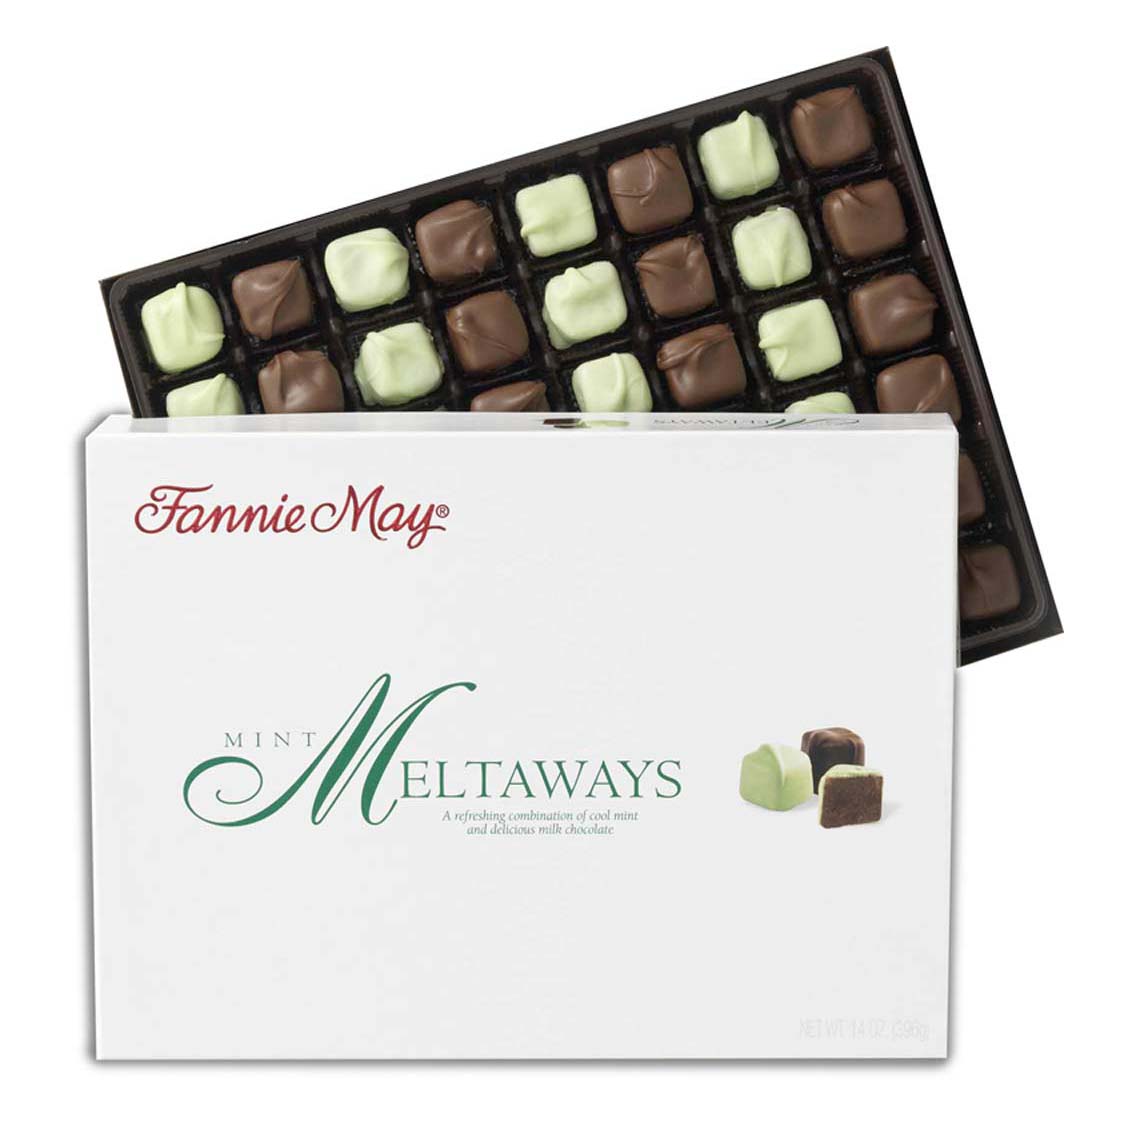 When Will Fannie Mae Mint Meltaways Be Available For Christmas 2021? 